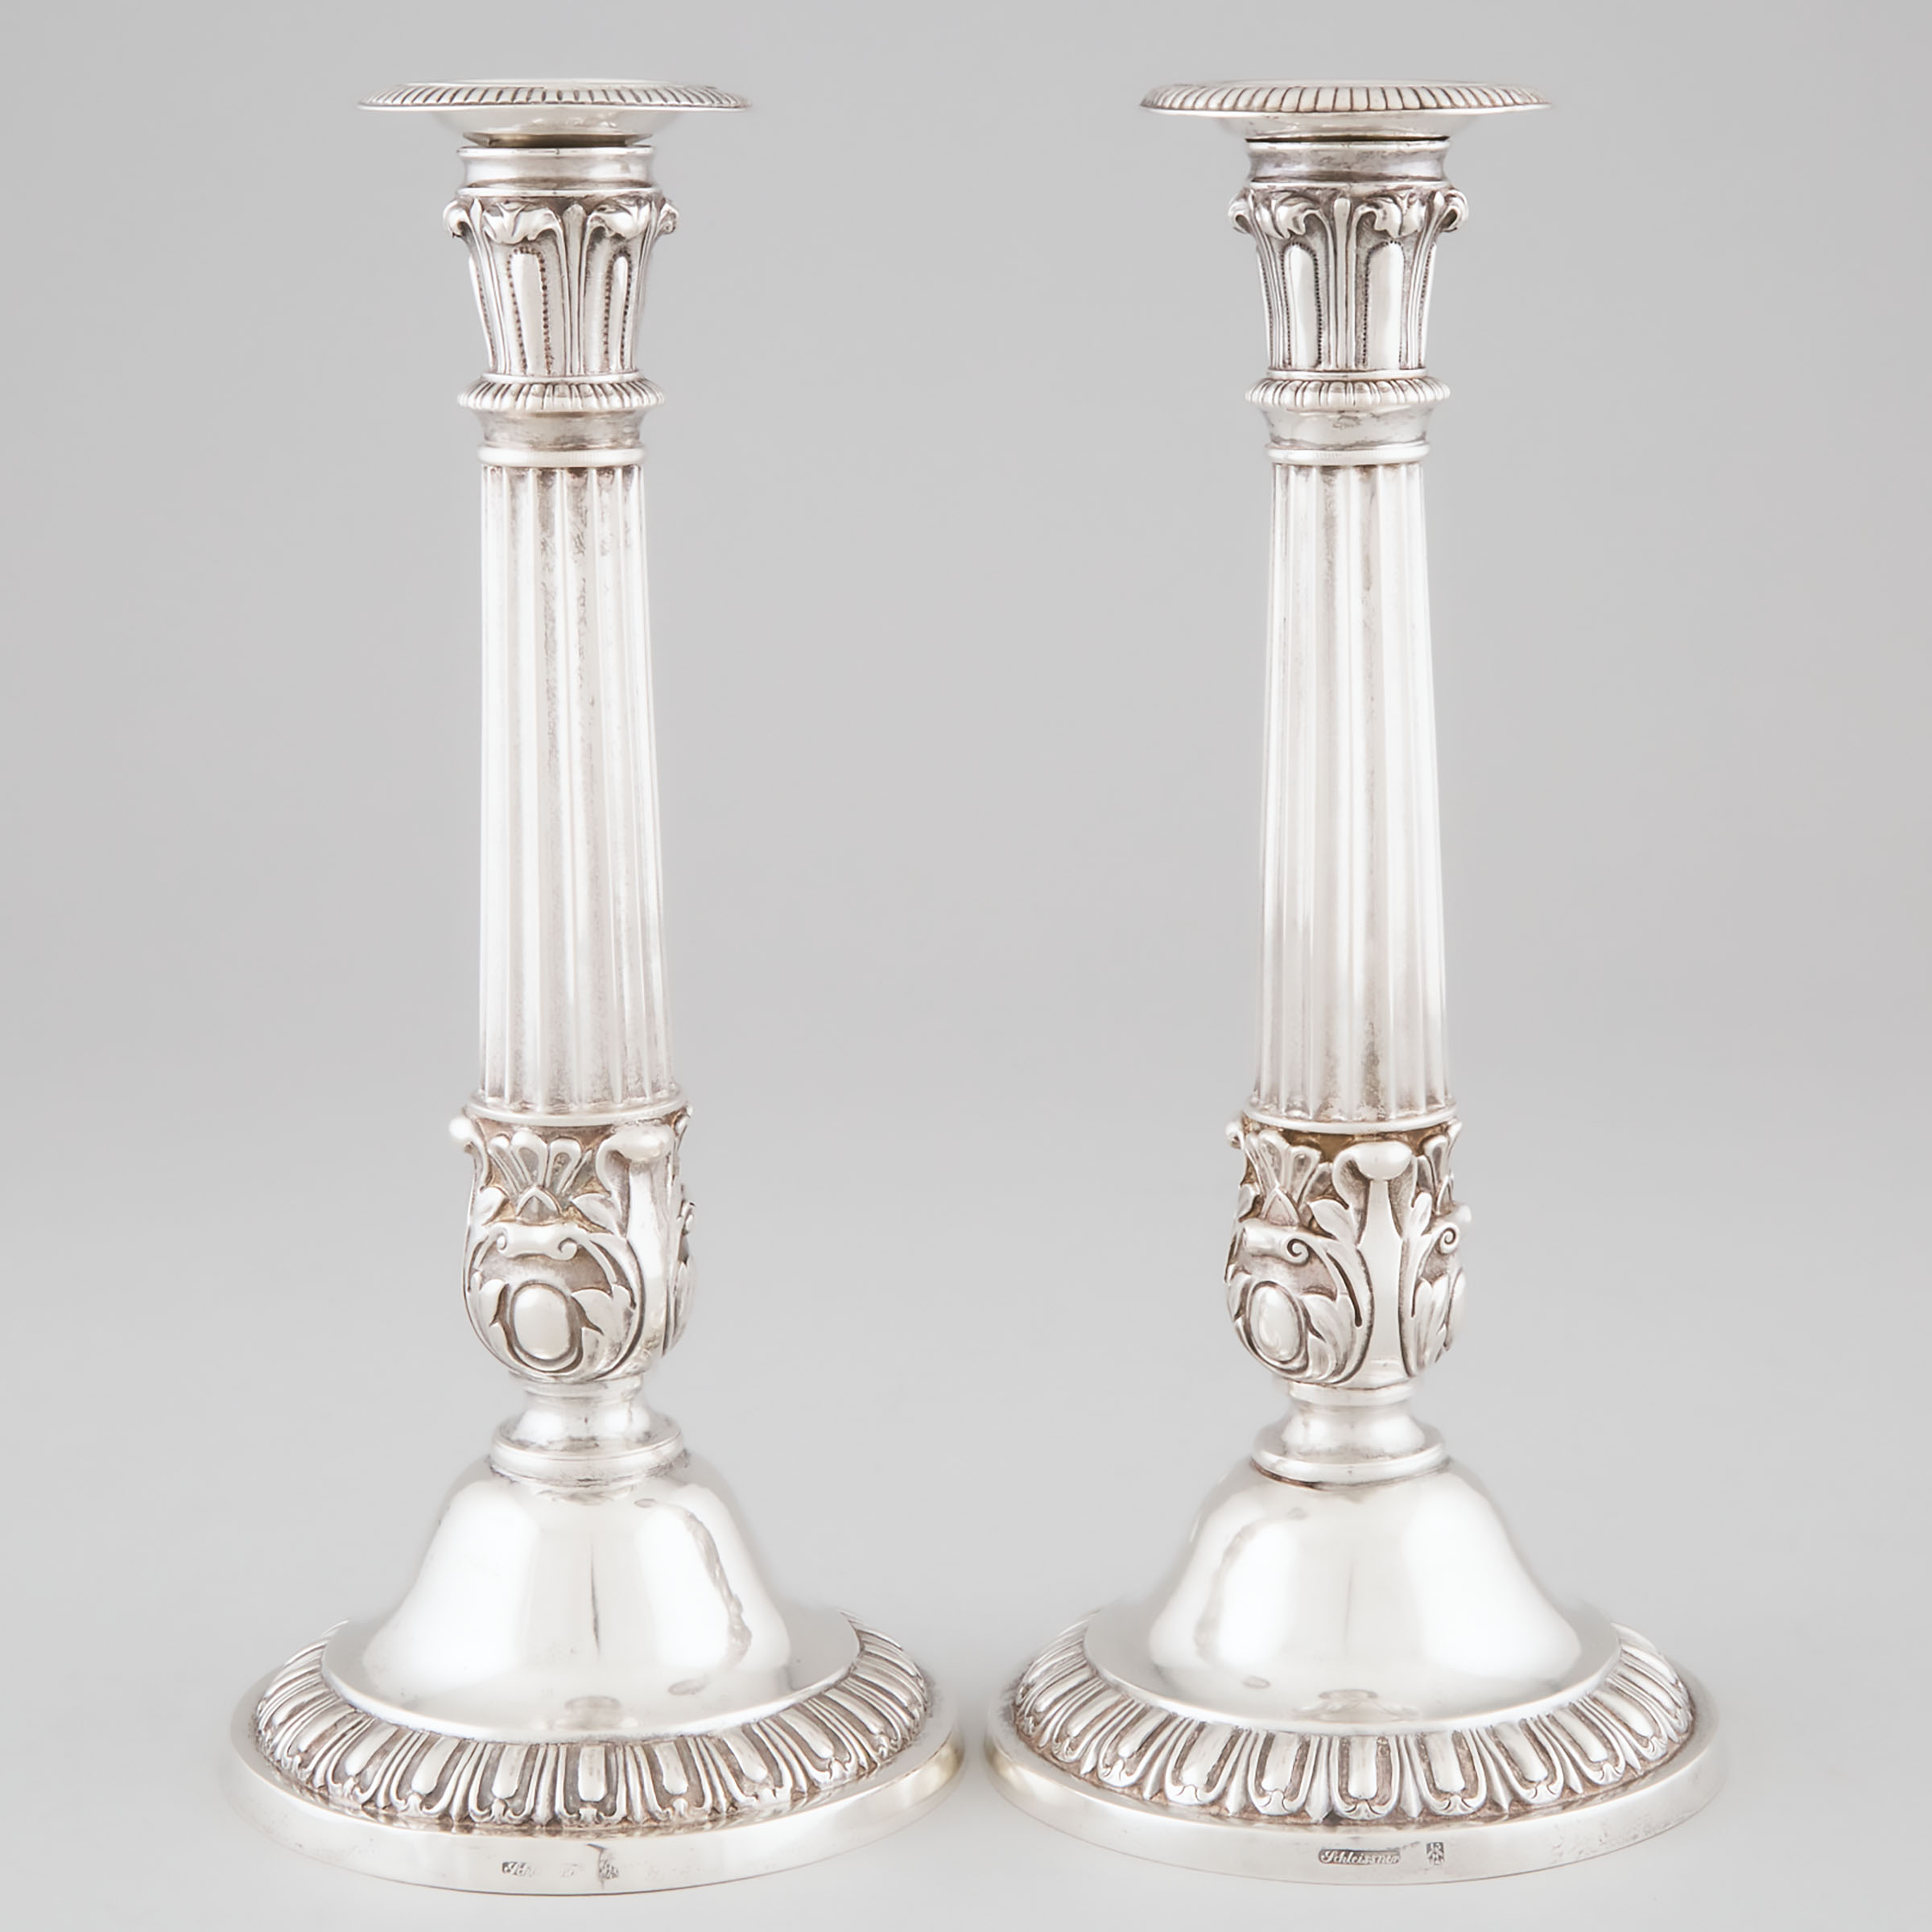 Pair of German Silver Table Candlesticks, 19th century